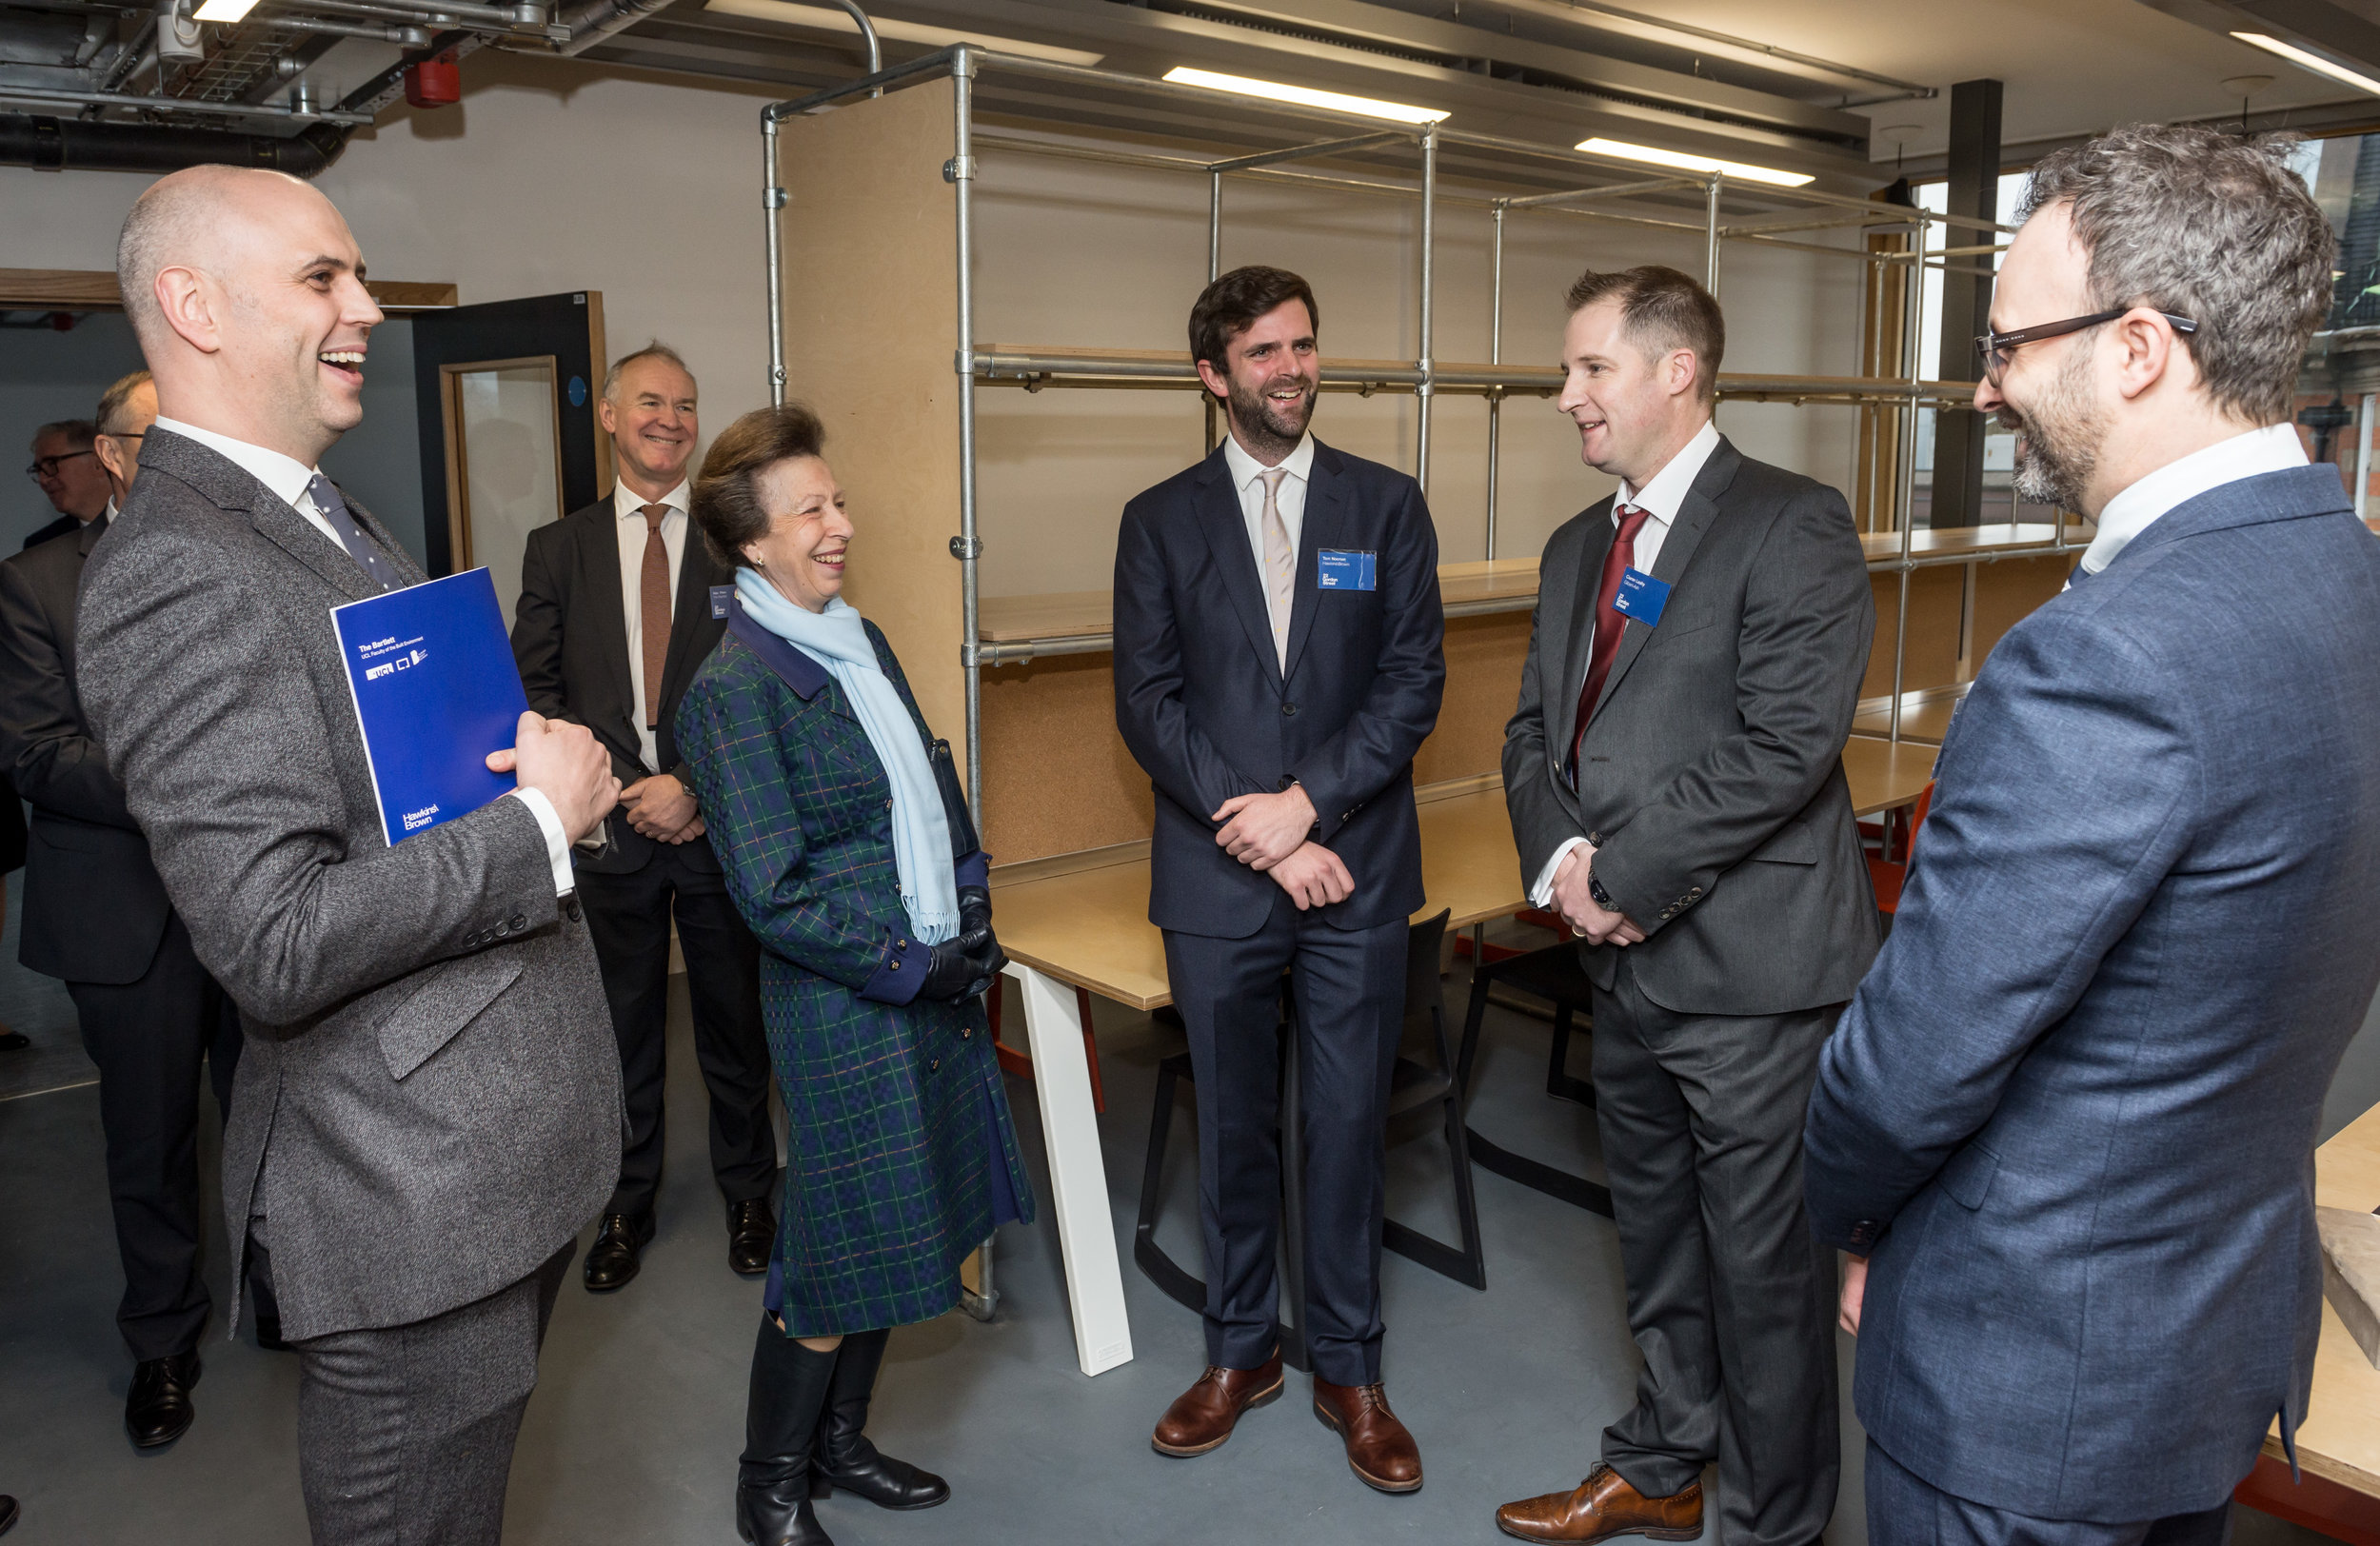  Lead Architect Euan MacDonald introduces HRH Princess Anne to Associate architect Tom Noonan, Project Manager Aaron Coffey and site Manager Ciaran Leahy as she tours the refurbished Bartlett School of Architecture before official opening the buildin